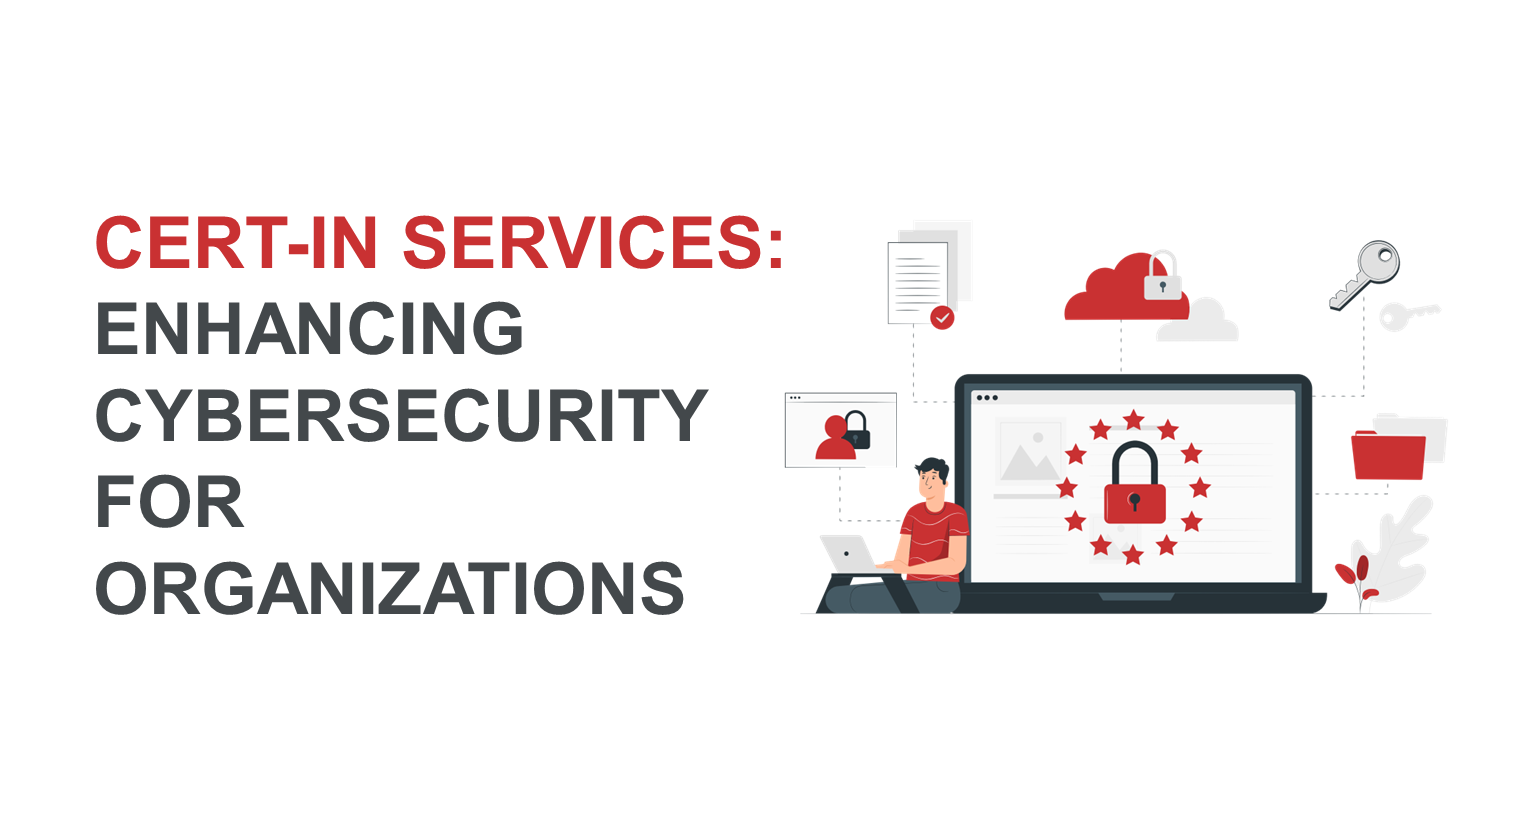 CERT-IN Services: Enhancing Cybersecurity for Organizations